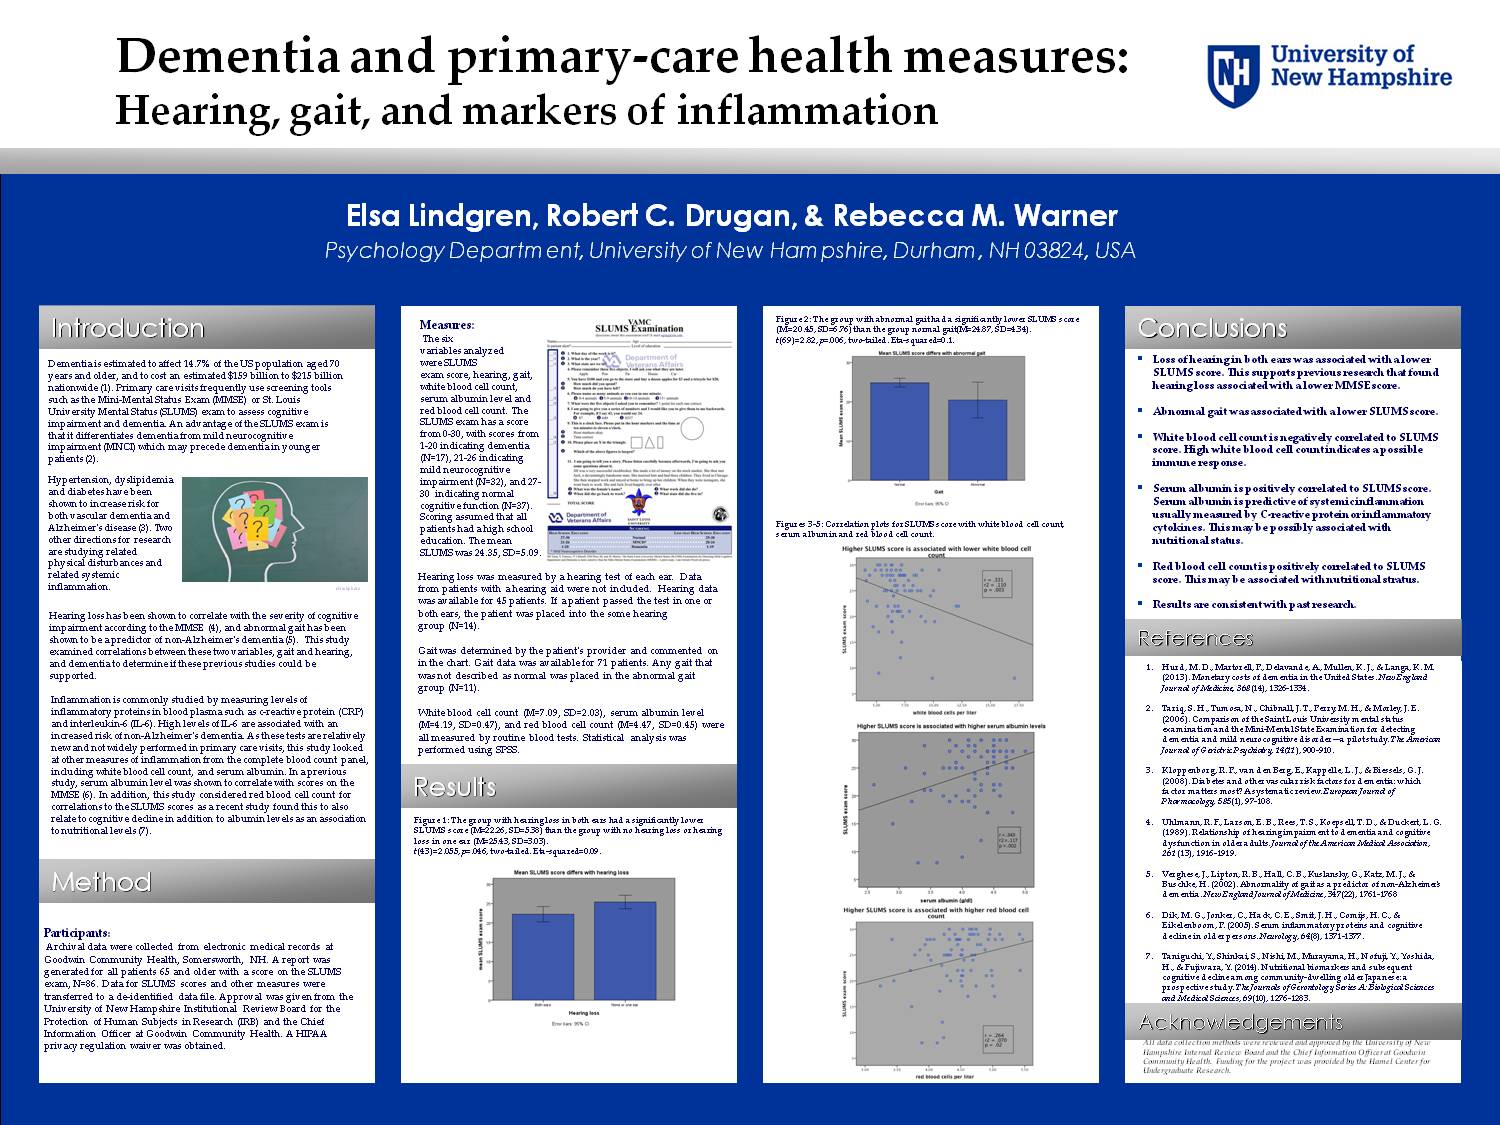 Dementia And Primary-Care Health Measures: Hearing, Gait And Markers Of Inflammation by eru43